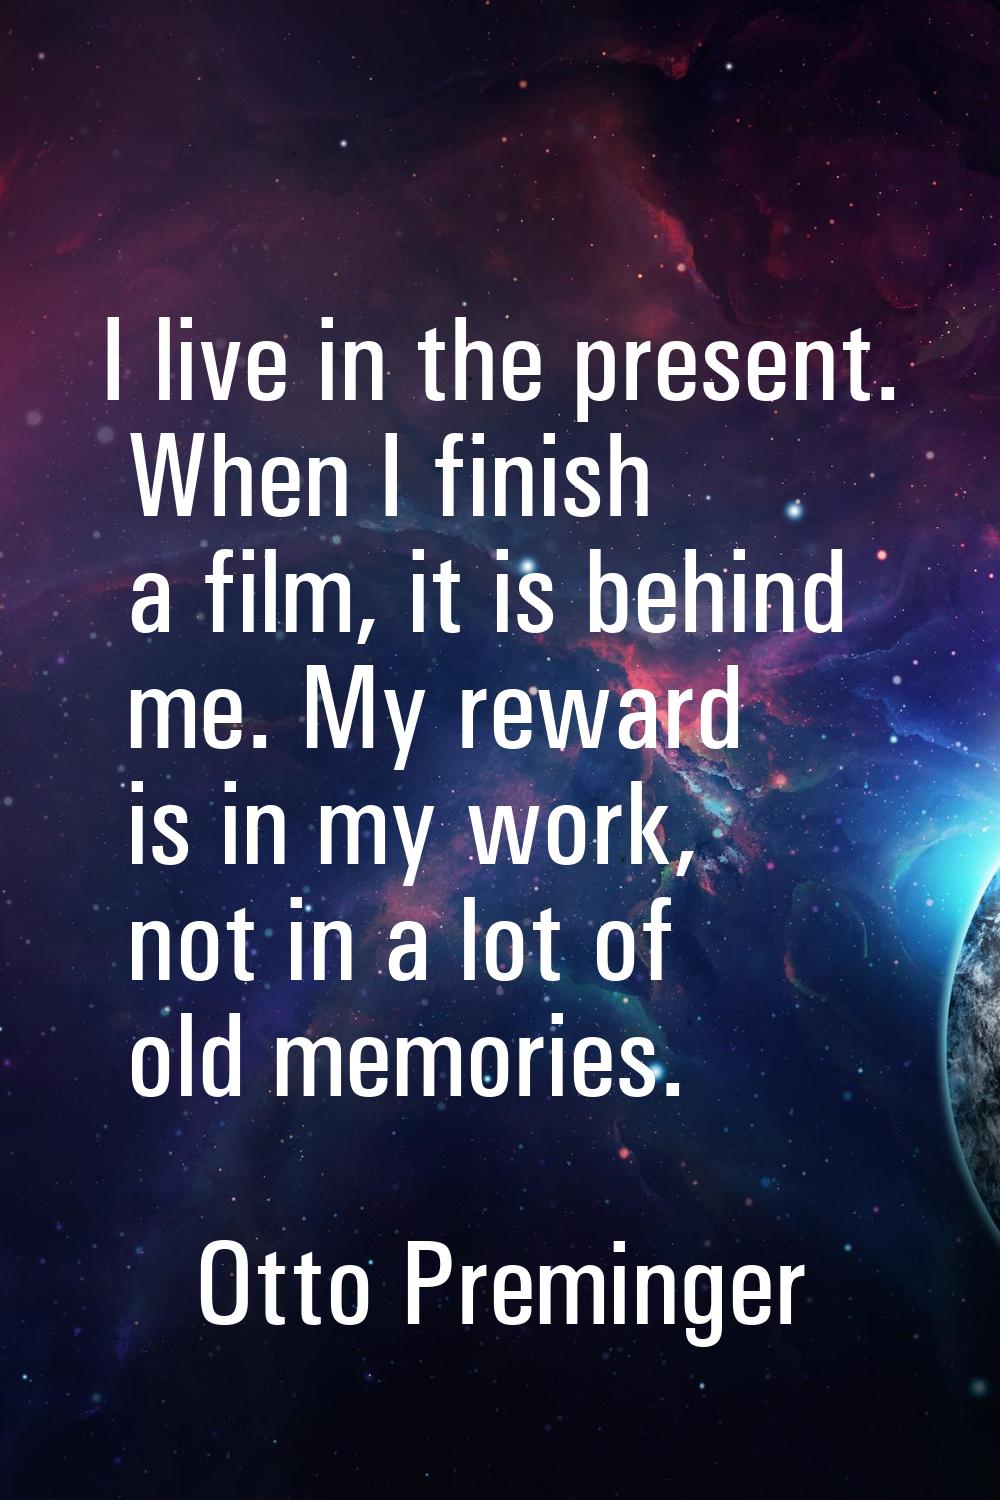 I live in the present. When I finish a film, it is behind me. My reward is in my work, not in a lot